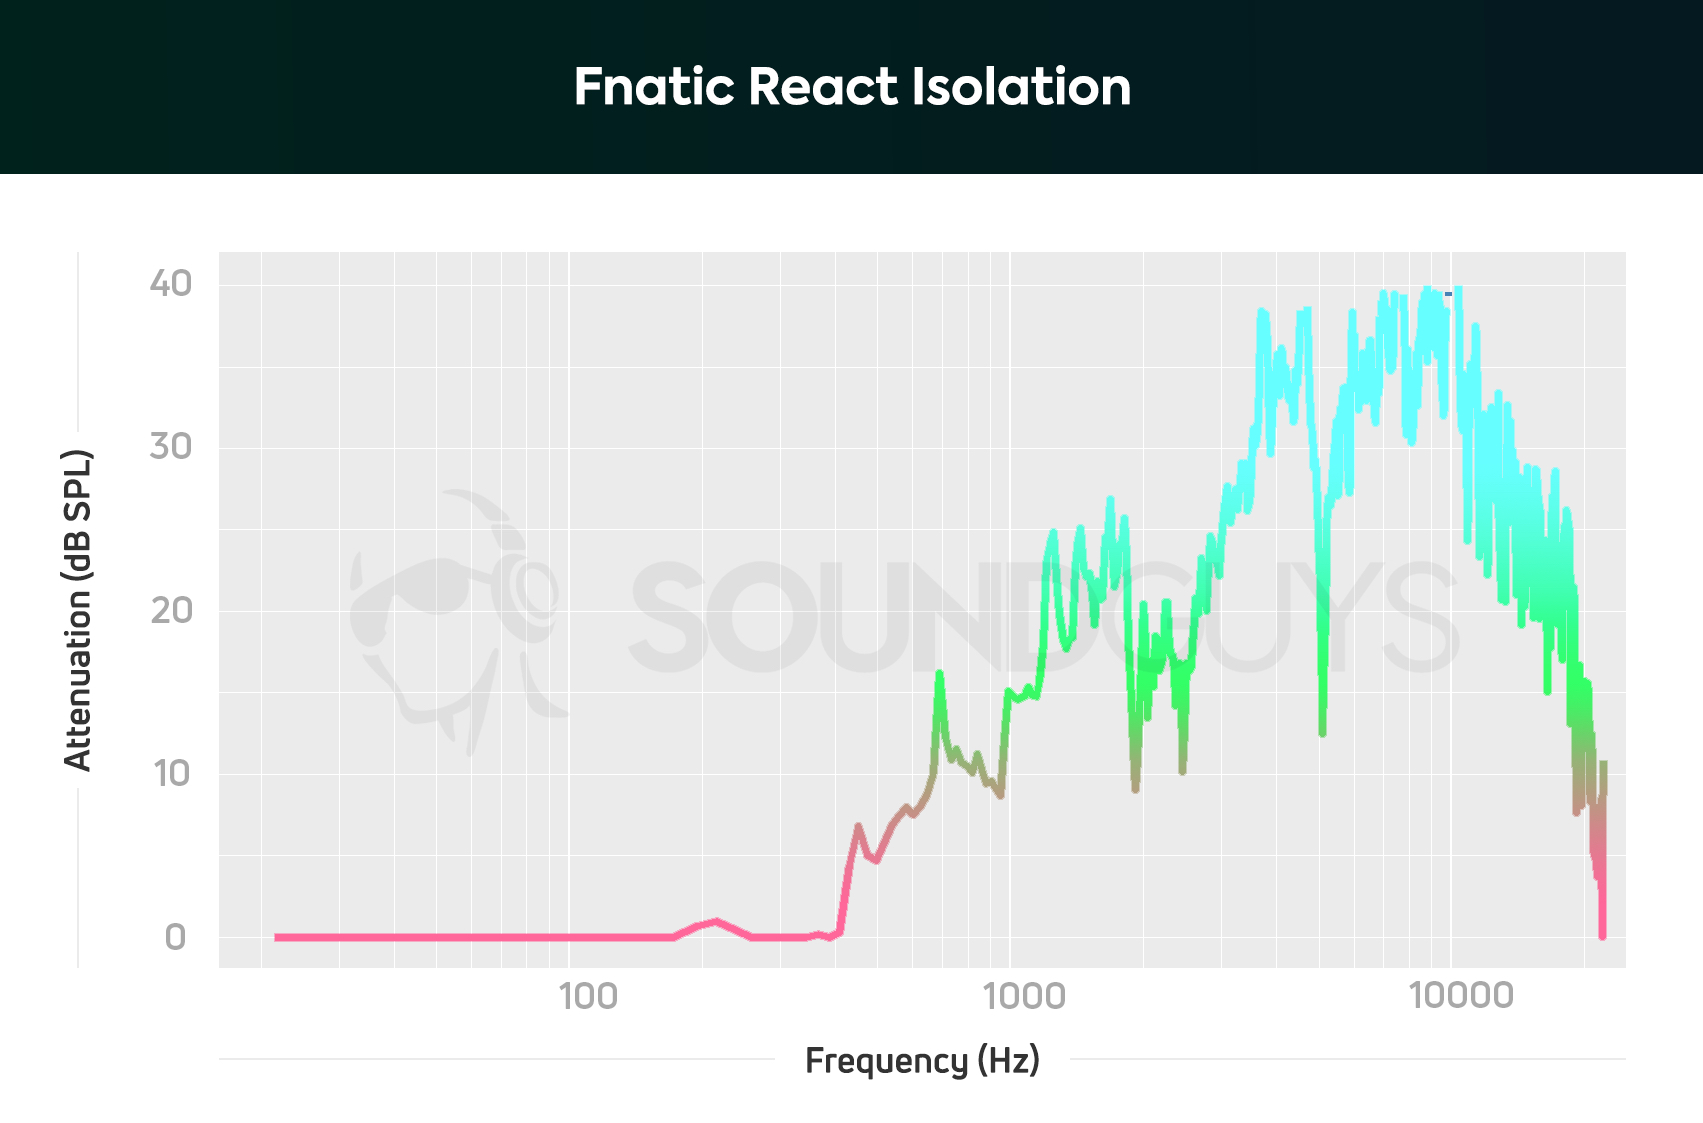 an isolation chart for the fnatic react gaming headset.